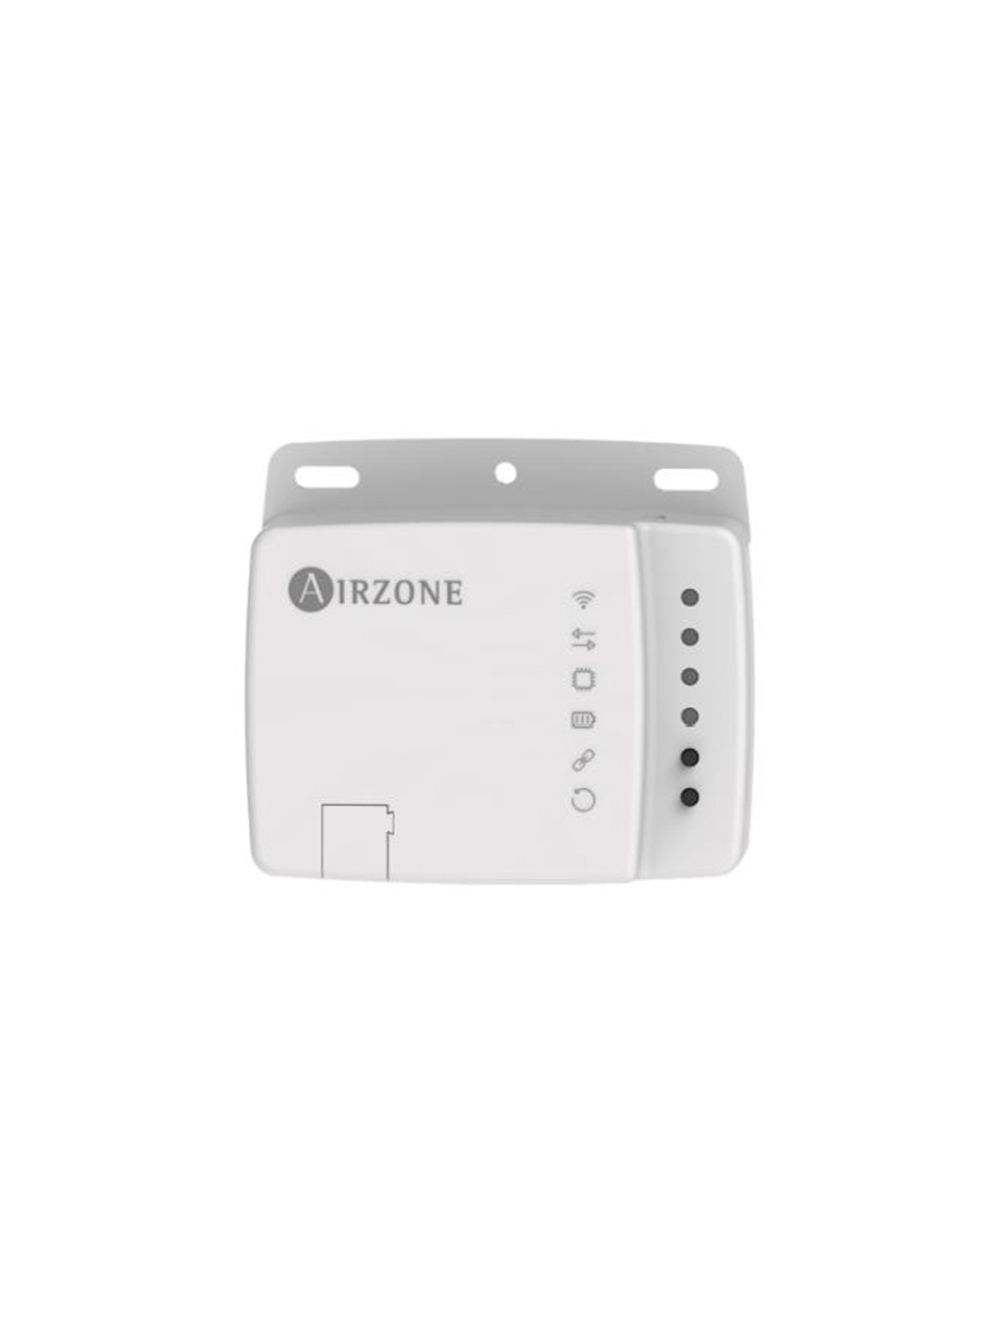 Daikin Wireless WiFi Interface Adapter for Ductless Systems